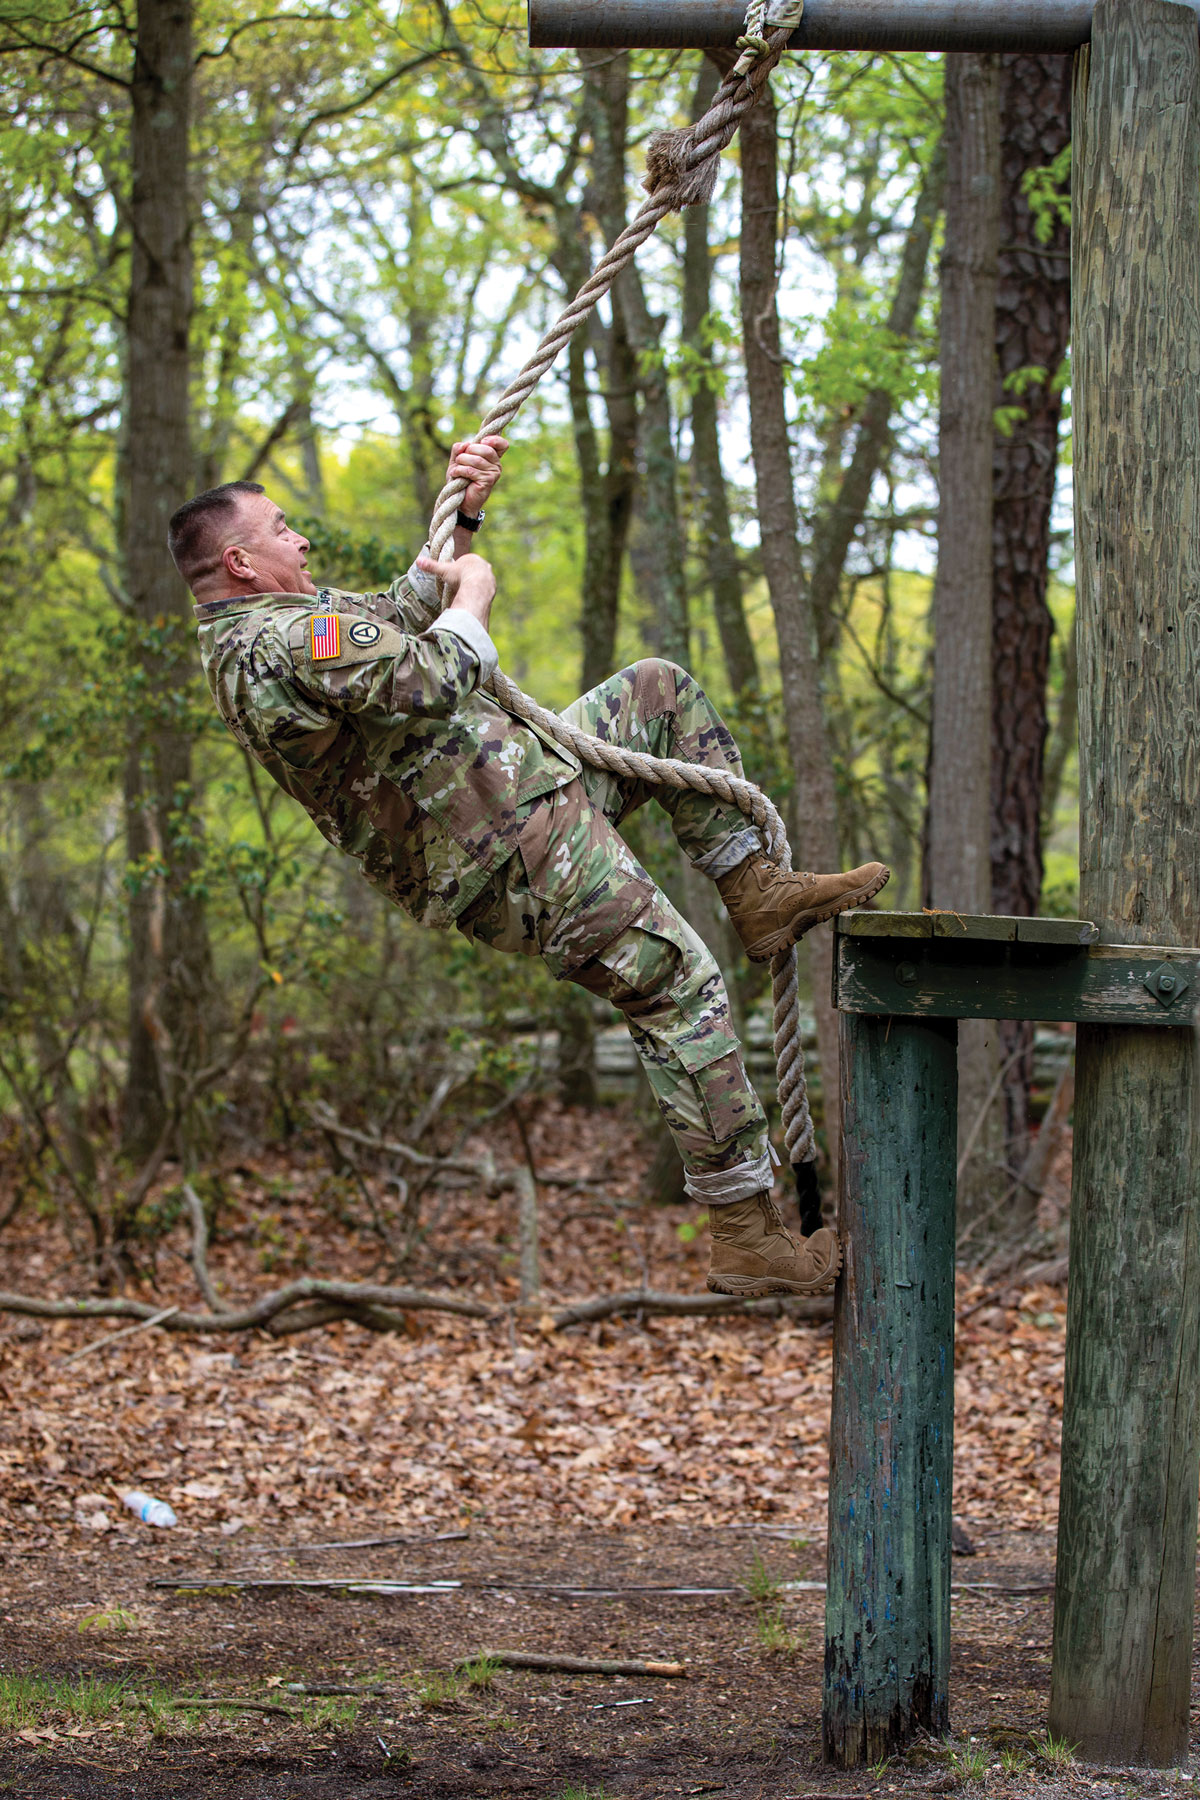 U.S. Army Reserve Command Sgt. Maj. Gregory G. Dirks, the command sergeant major of the 361st Theater Public Affairs Sustainment Element, climbs a rope on an obstacle course during Operation Strike Back at Joint Base McGuire-Dix-Lakehurst, New Jersey, 27 April 2023